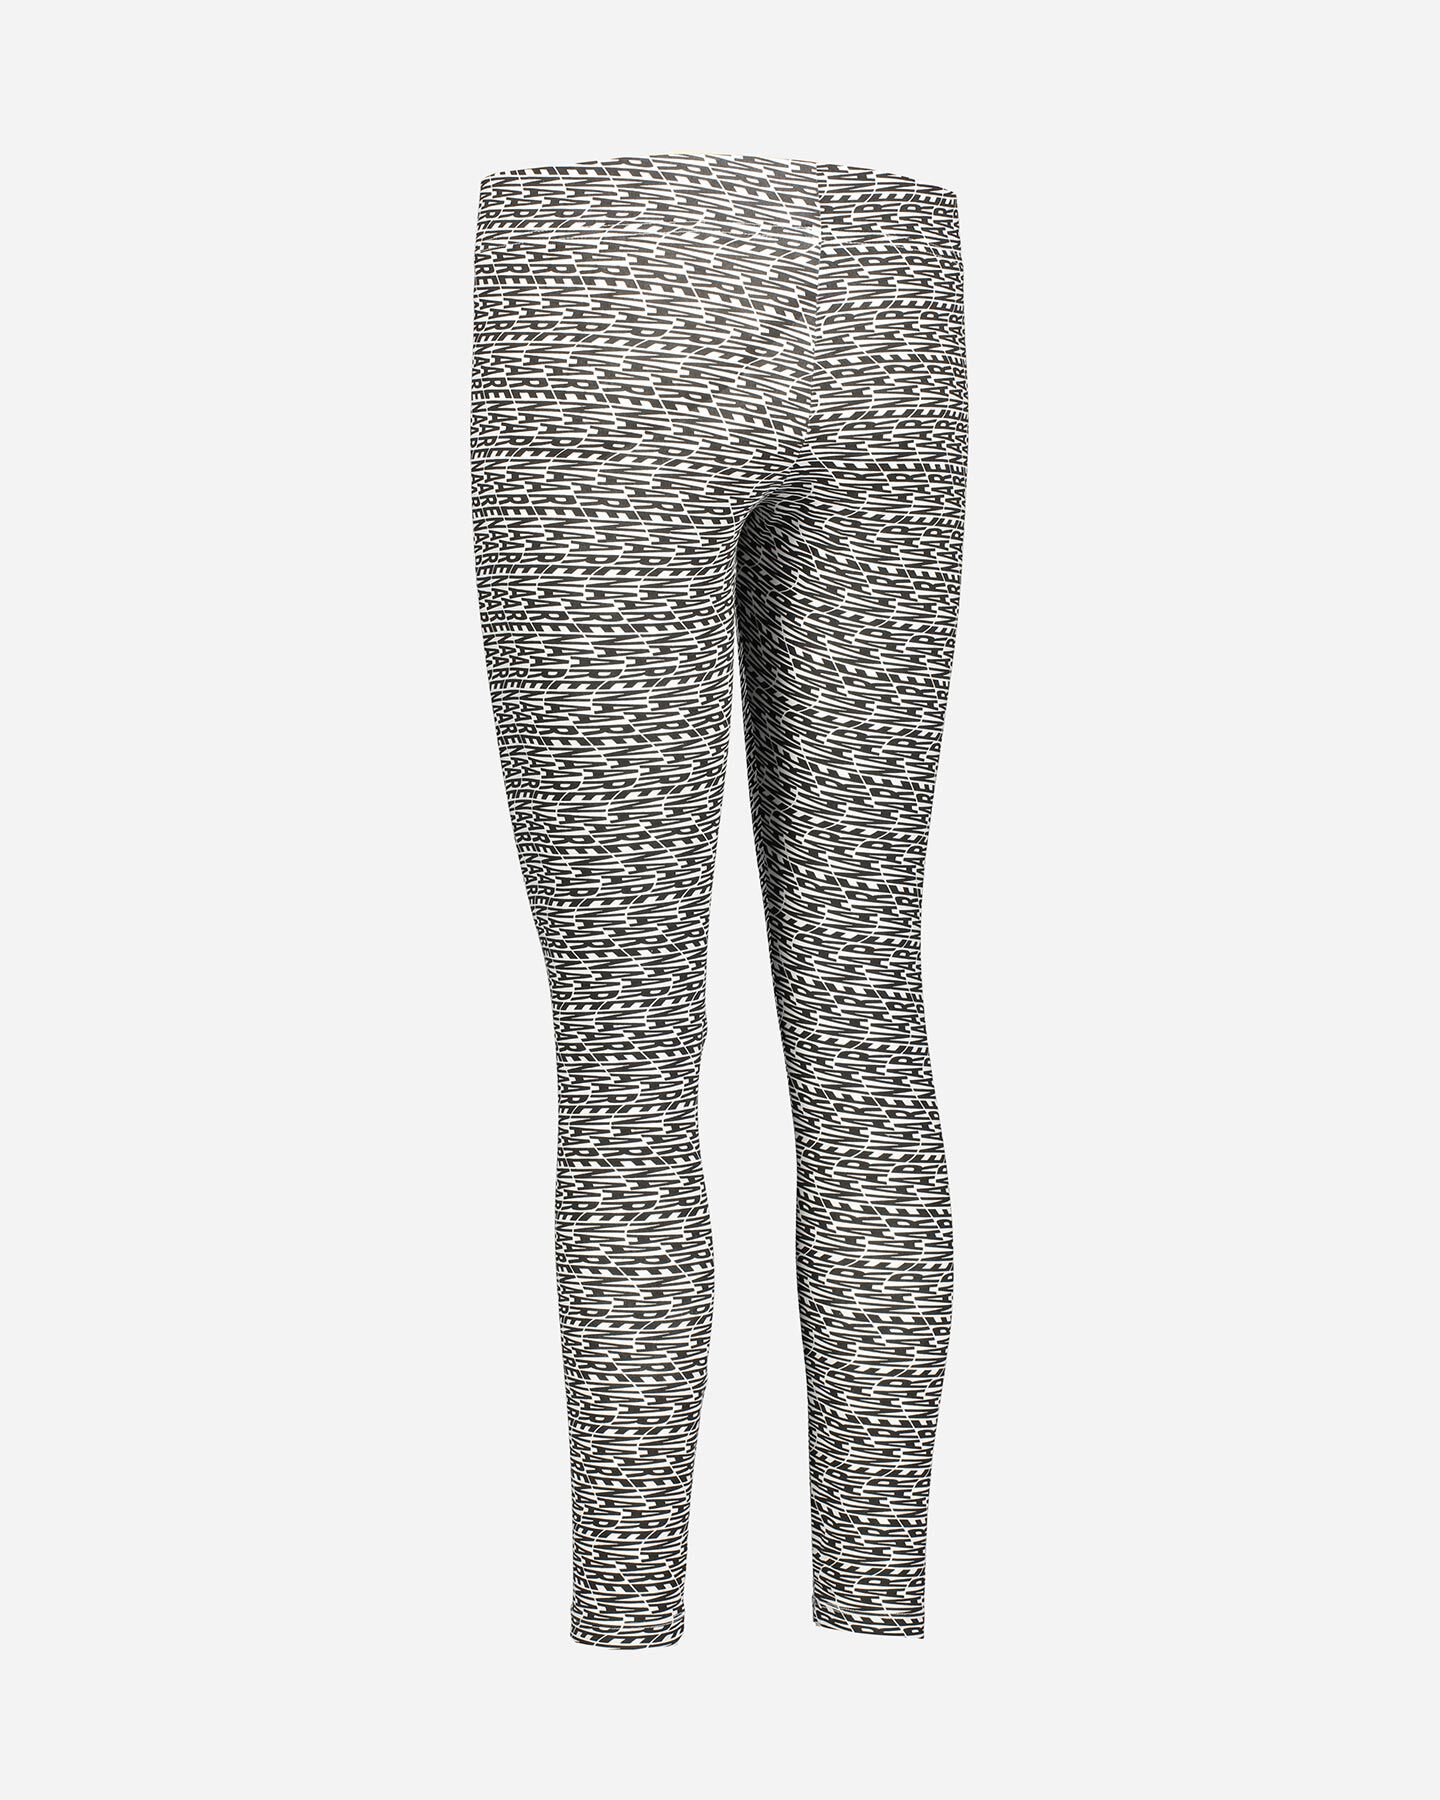  Leggings ARENA JSTRETCH AOP W S4087513|001/AOP|XS scatto 5